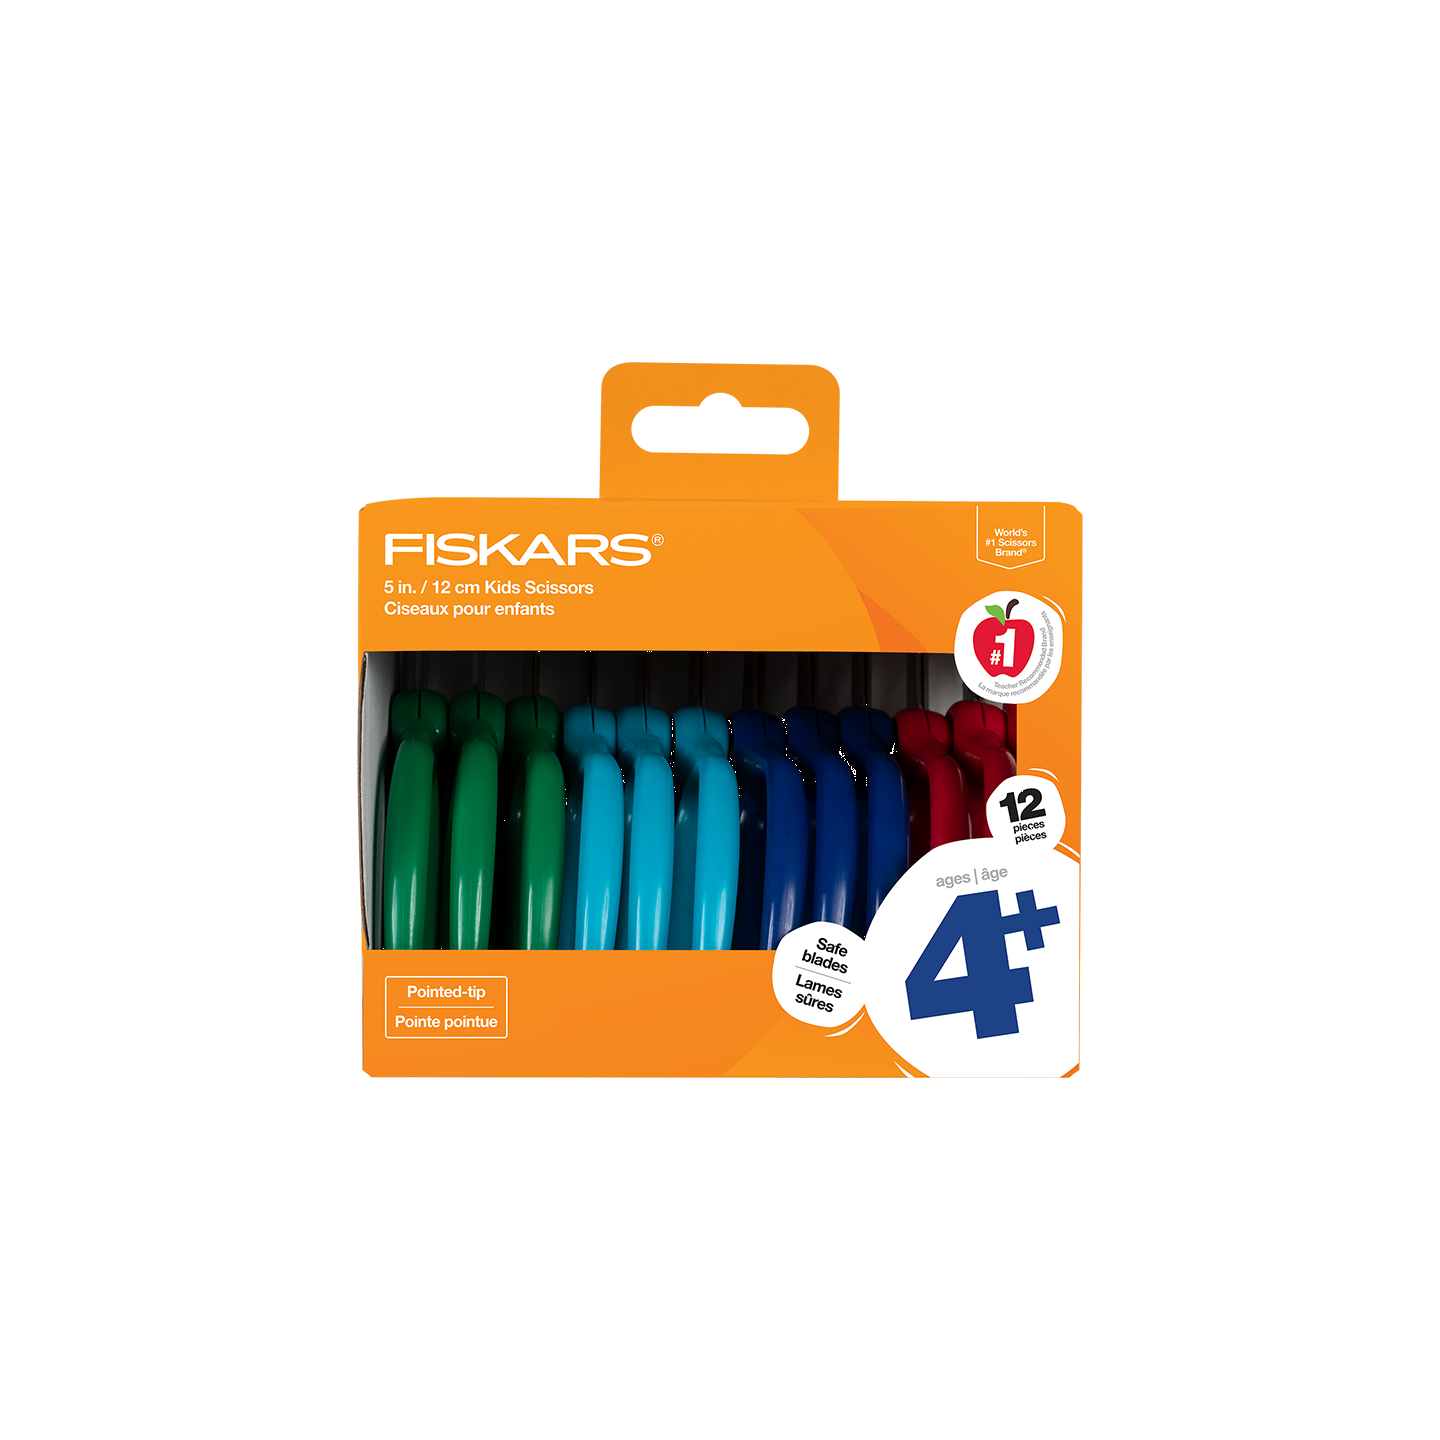 FISKARS POINTED-TIP 5 SAFETY EDGE BLADES SCISSORS - AGES 4+